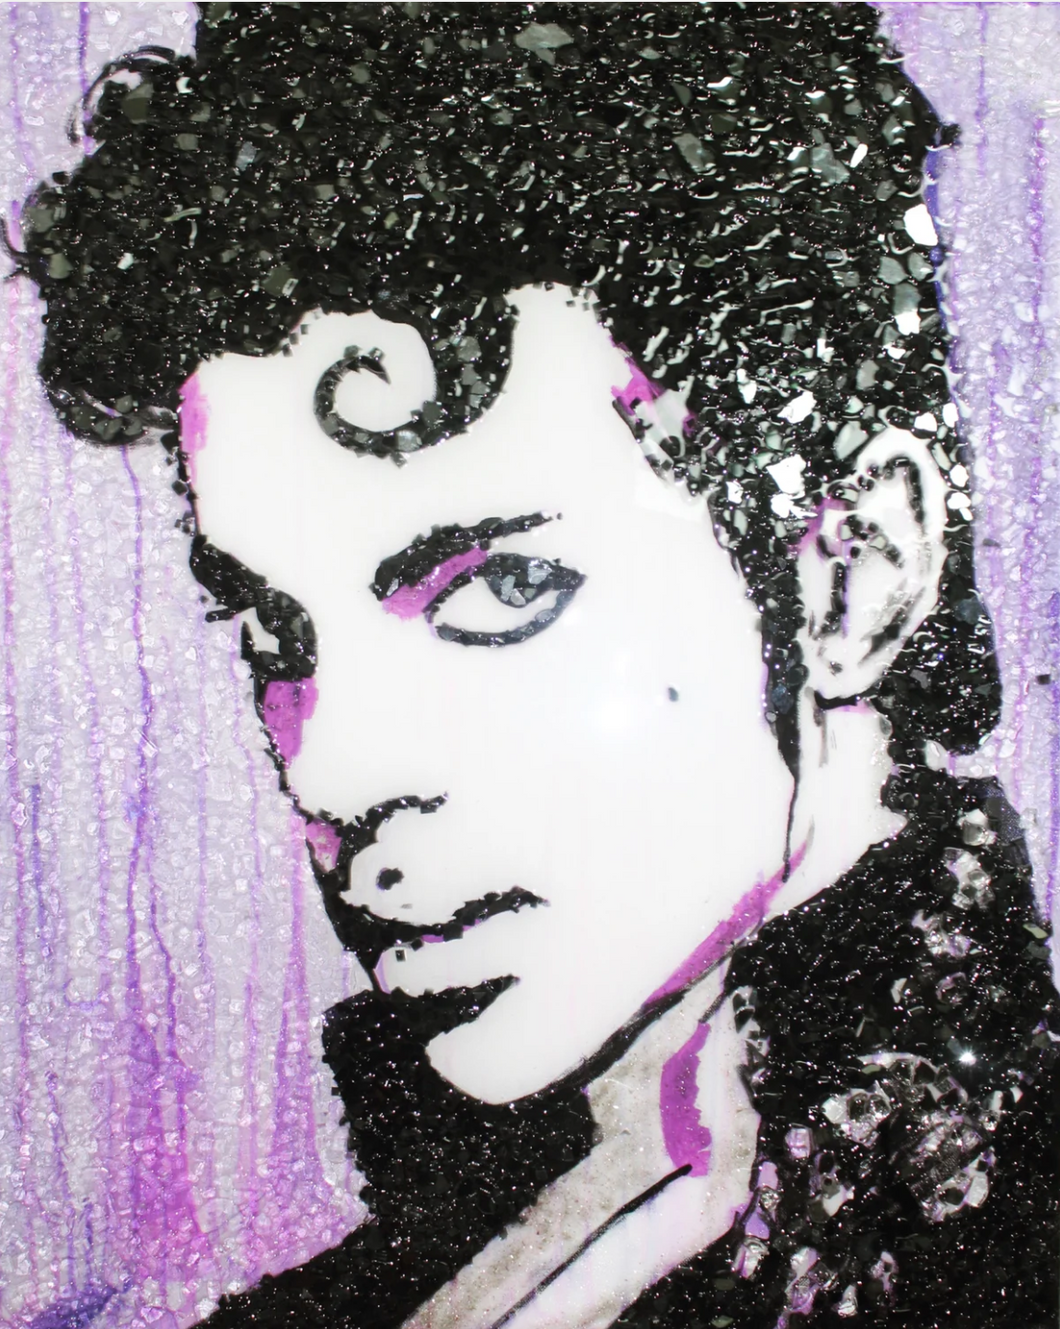 Prince - Crushed Glass Original Piece in Private Collection at Manhattan, New York